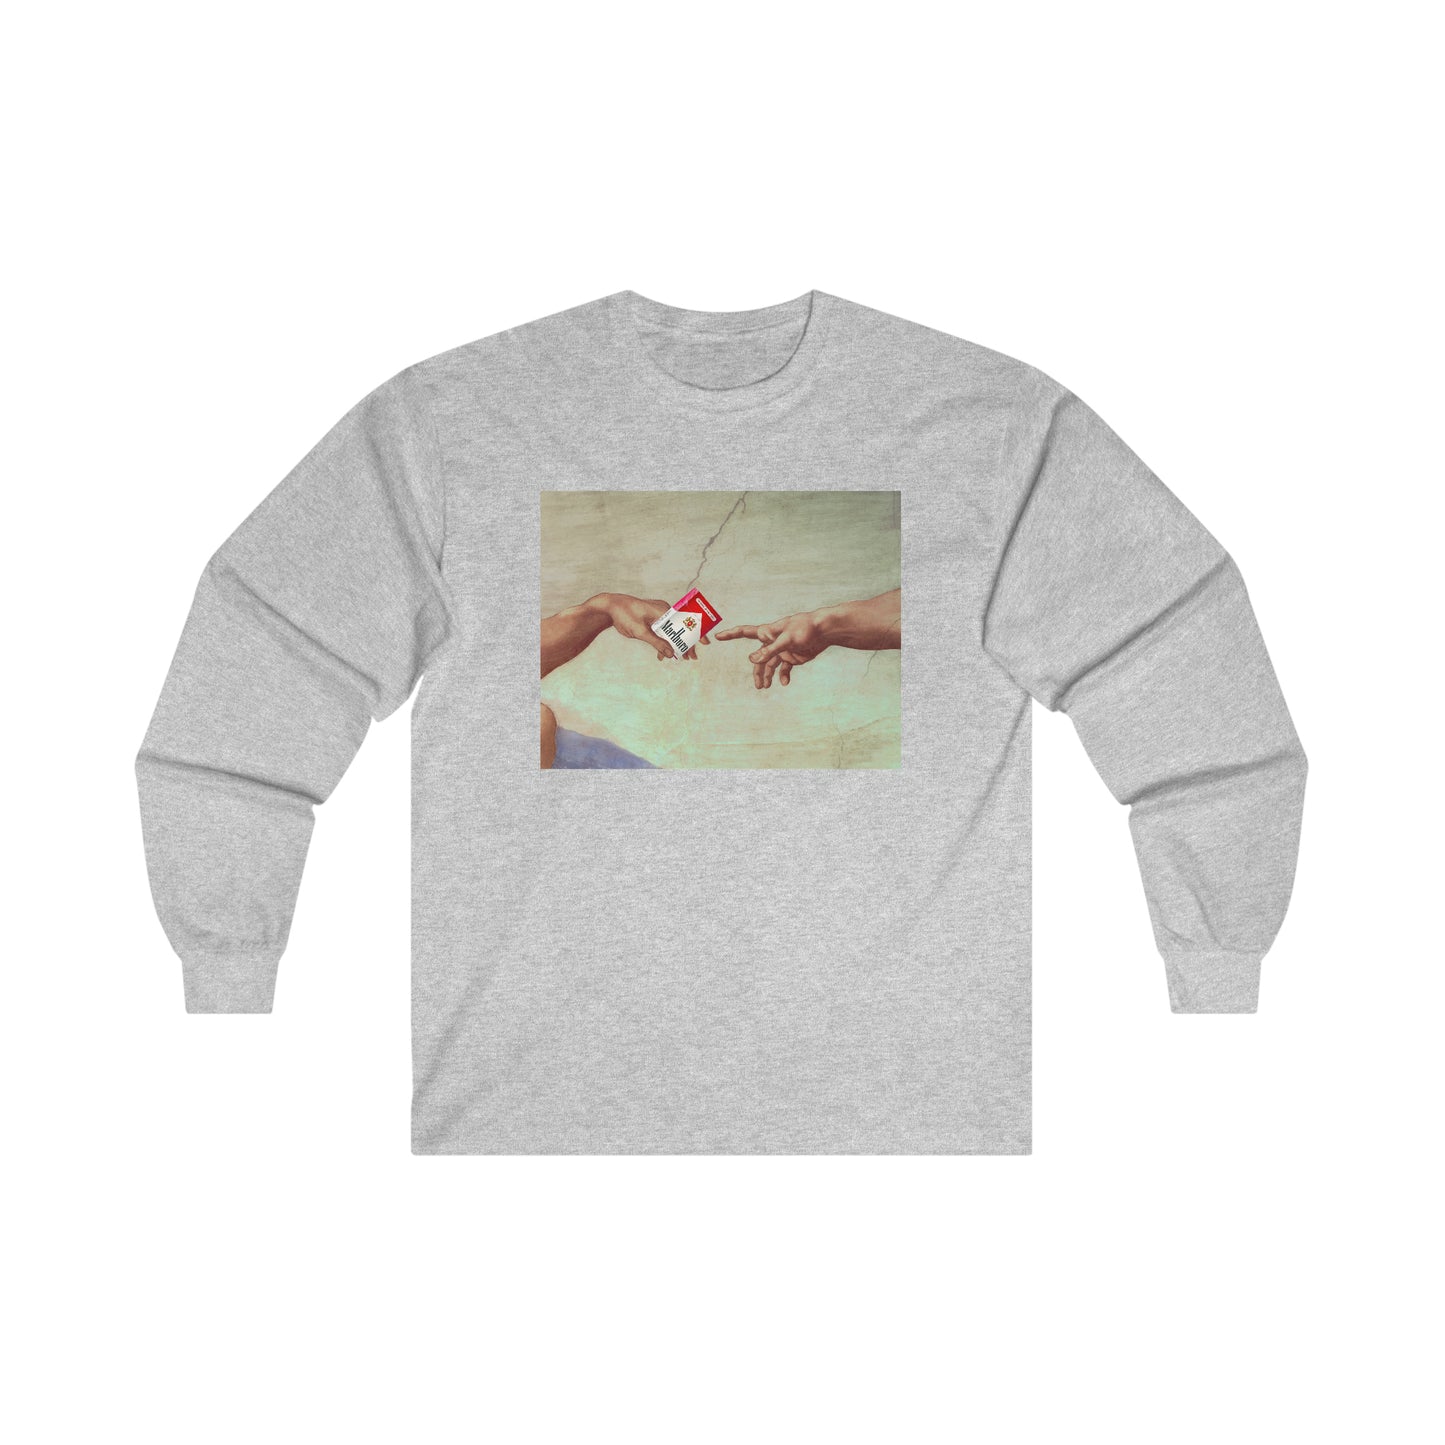 Gods Hand passing cigarettes - Ultra Cotton Long Sleeve Tee